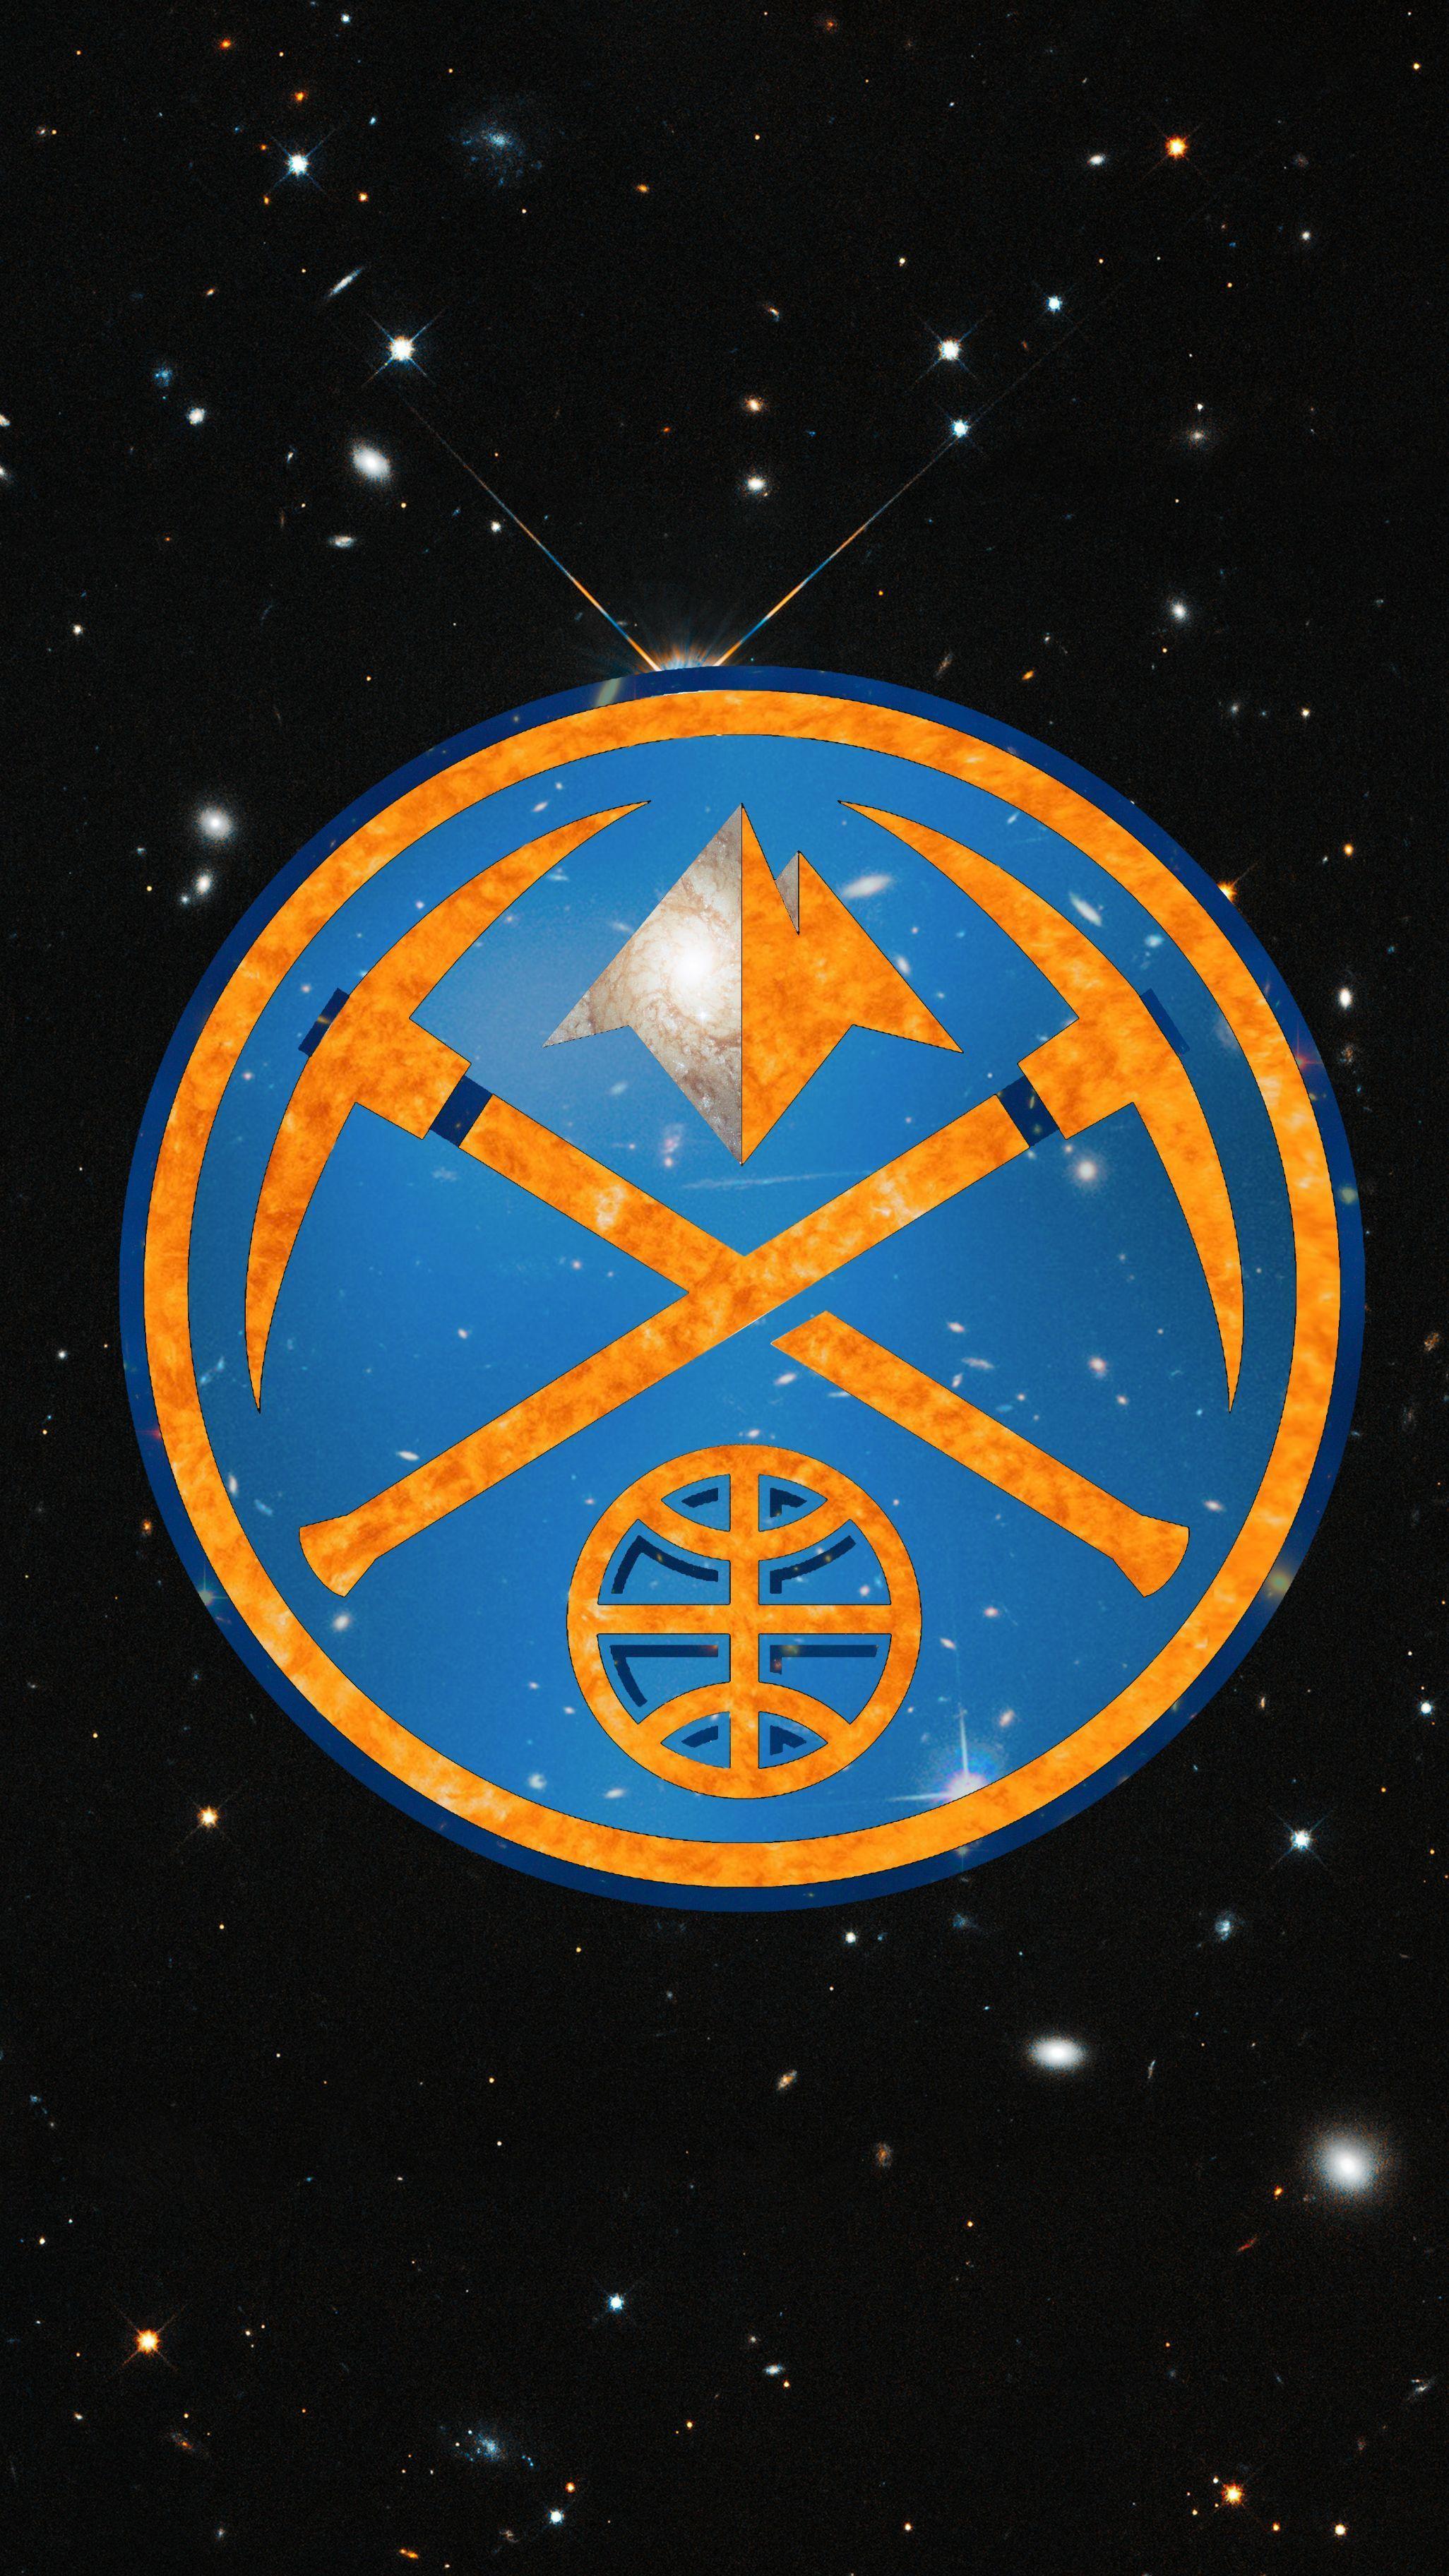 Denver Nuggets logo I made using Hubble space image